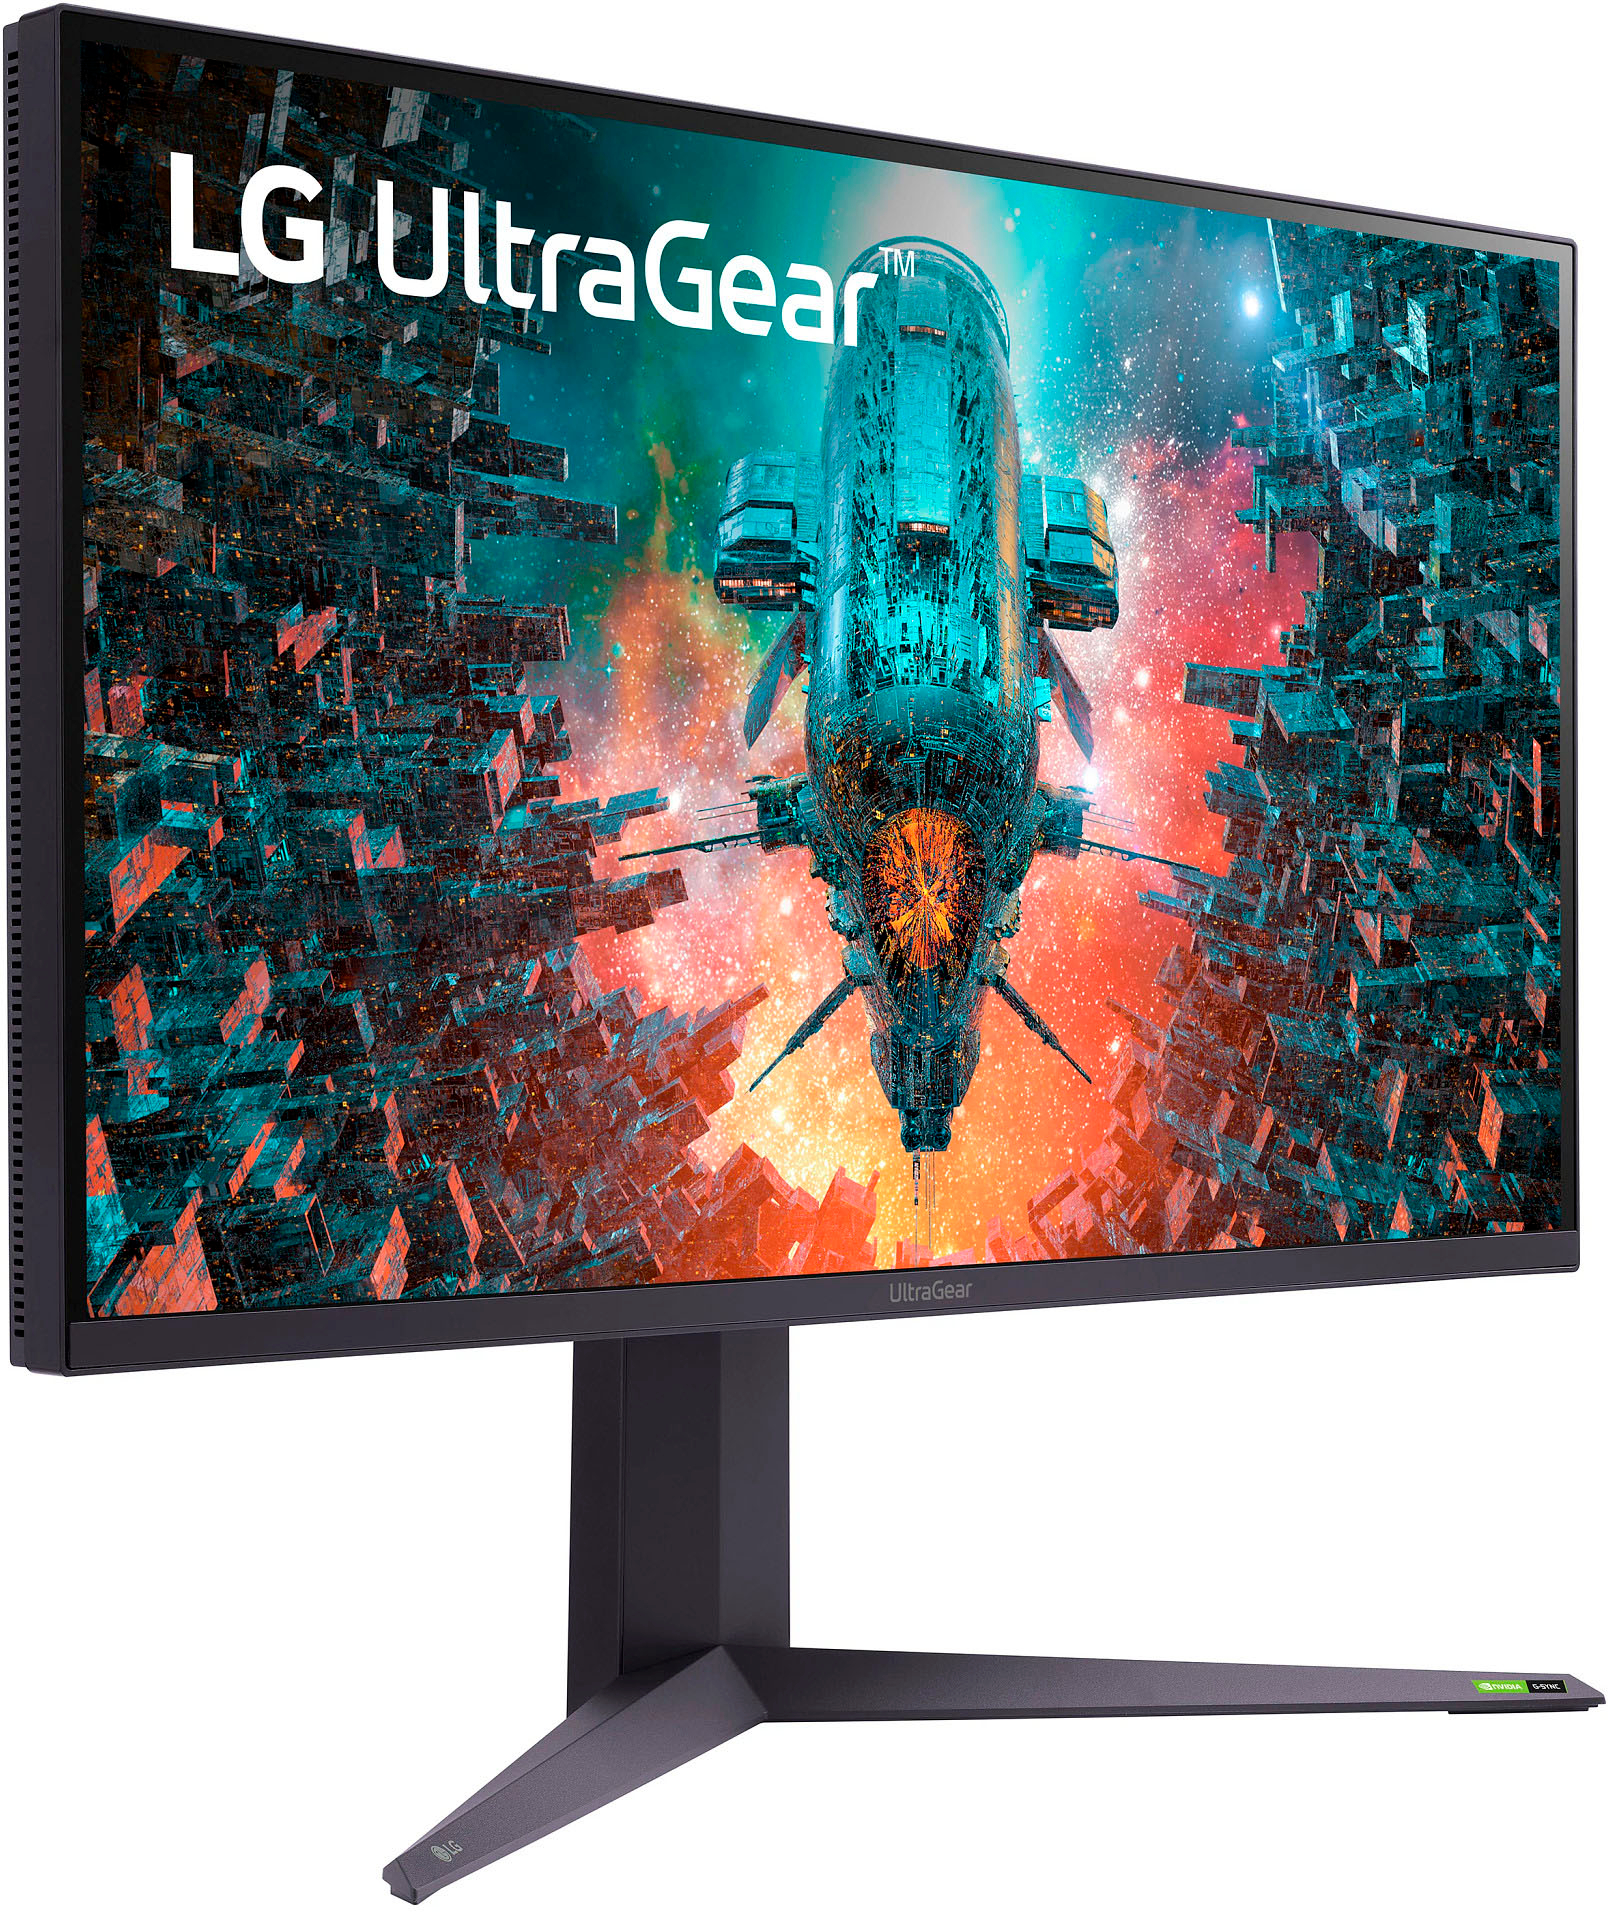 Back View: LG - UltraGear 32" IPS LED 4K UHD G-SYNC Compatible and AMD FreeSync Premium Pro Monitor with HDR (HDMI, DisplayPort)